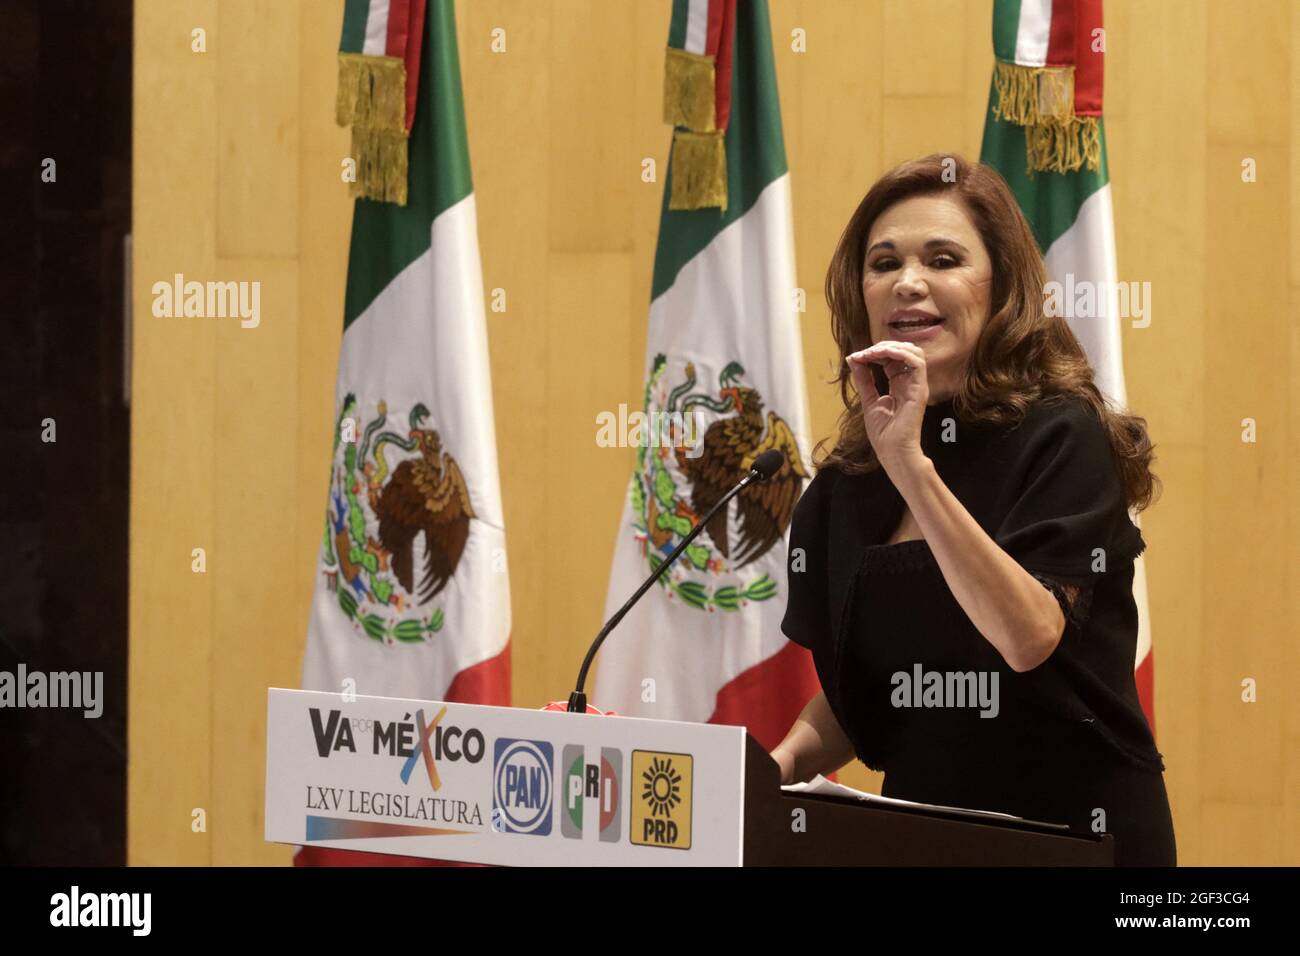 Blanca Alcala, elected legislator of the Institutional Revolutionary Party speaks during the presentation of the joint legislative and party agenda of the 'Va por México' coalition to confront from the Mexican Congress in the LXV Legislature the authoritarianism and populism of the president of Mexico, Andrés Manuel López Obrador. On August 21, 2021 in Mexico City, Mexico. Photo by Luis Barron/Eyepix/ABACAPRESS.COM Stock Photo